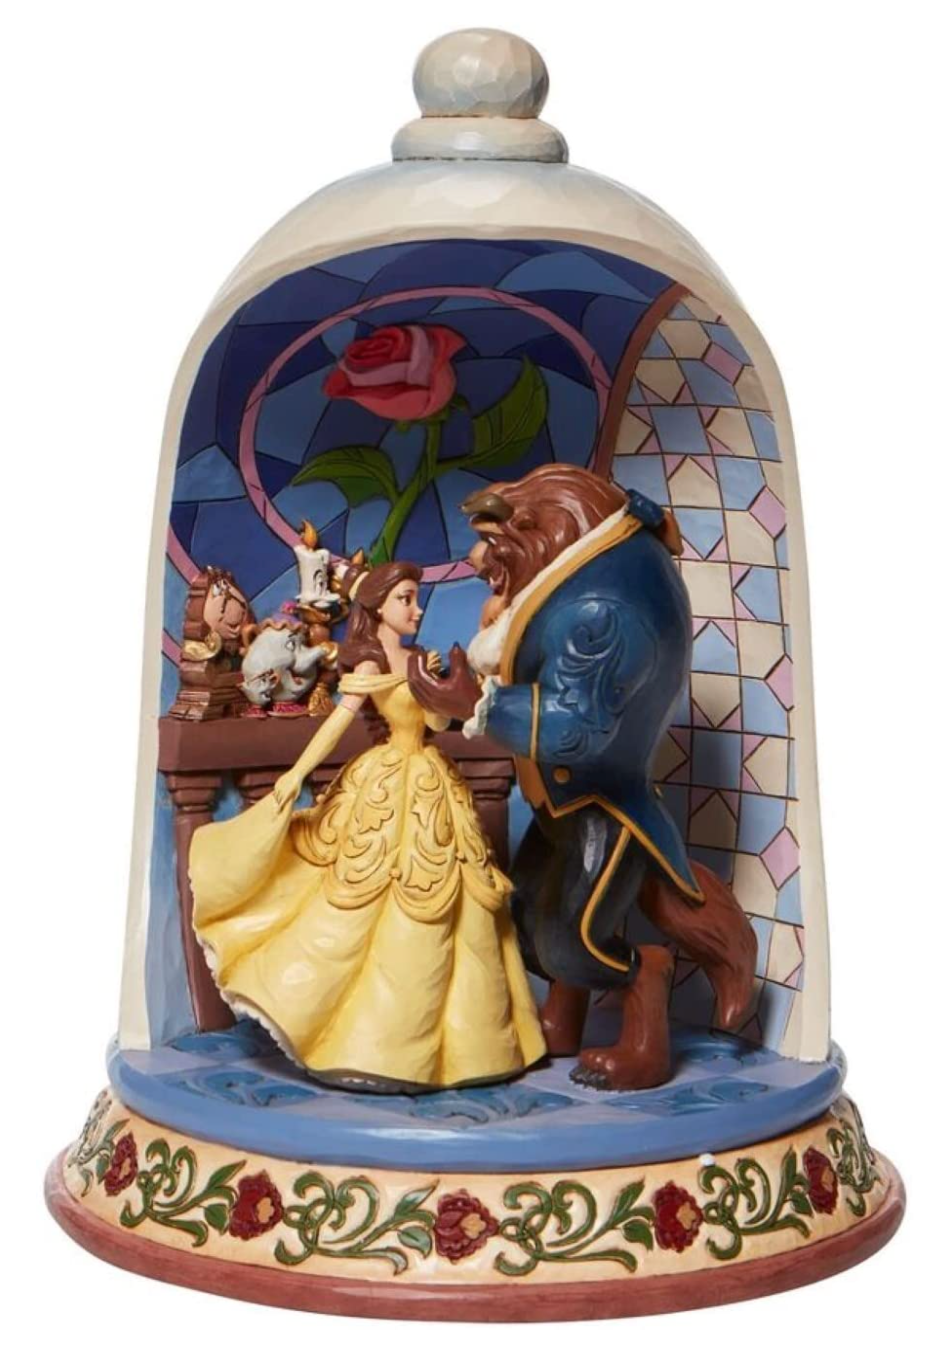 Beauty and the Beast Rose Dome by Jim Shore Disney Traditions - Sunnyside  Gift Shop